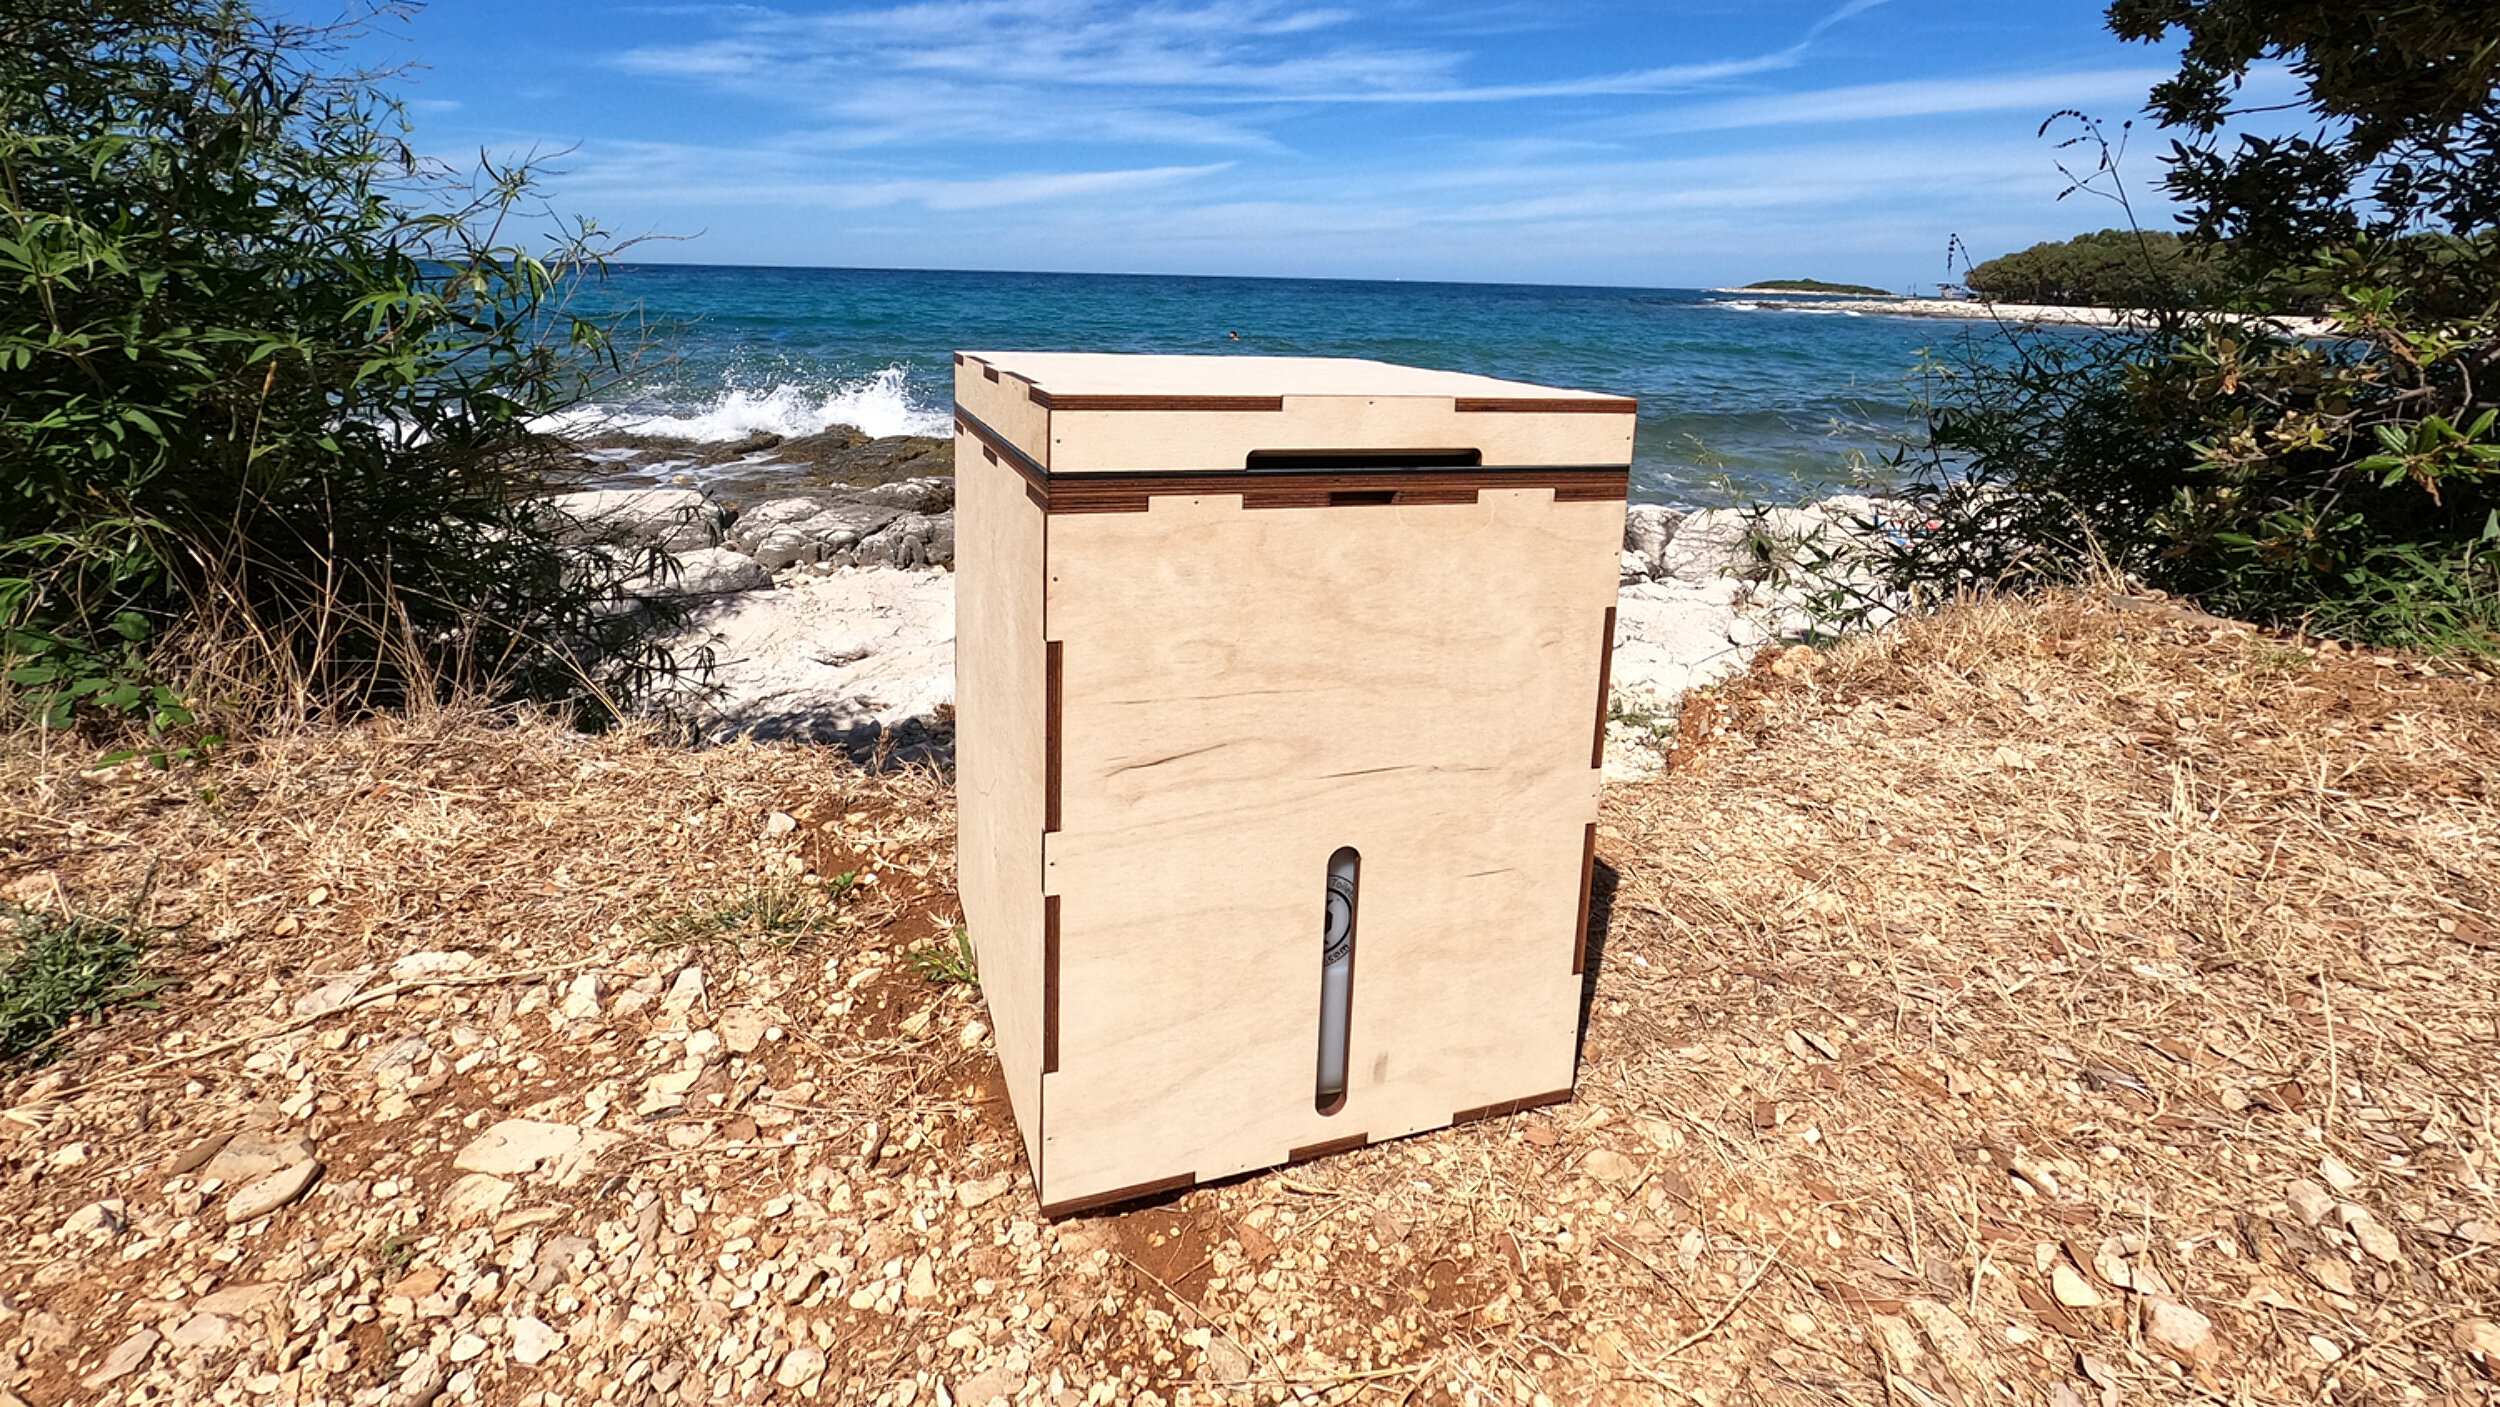 Our dry composting toilet MiniLoo is quickly ready for use on your beach holiday